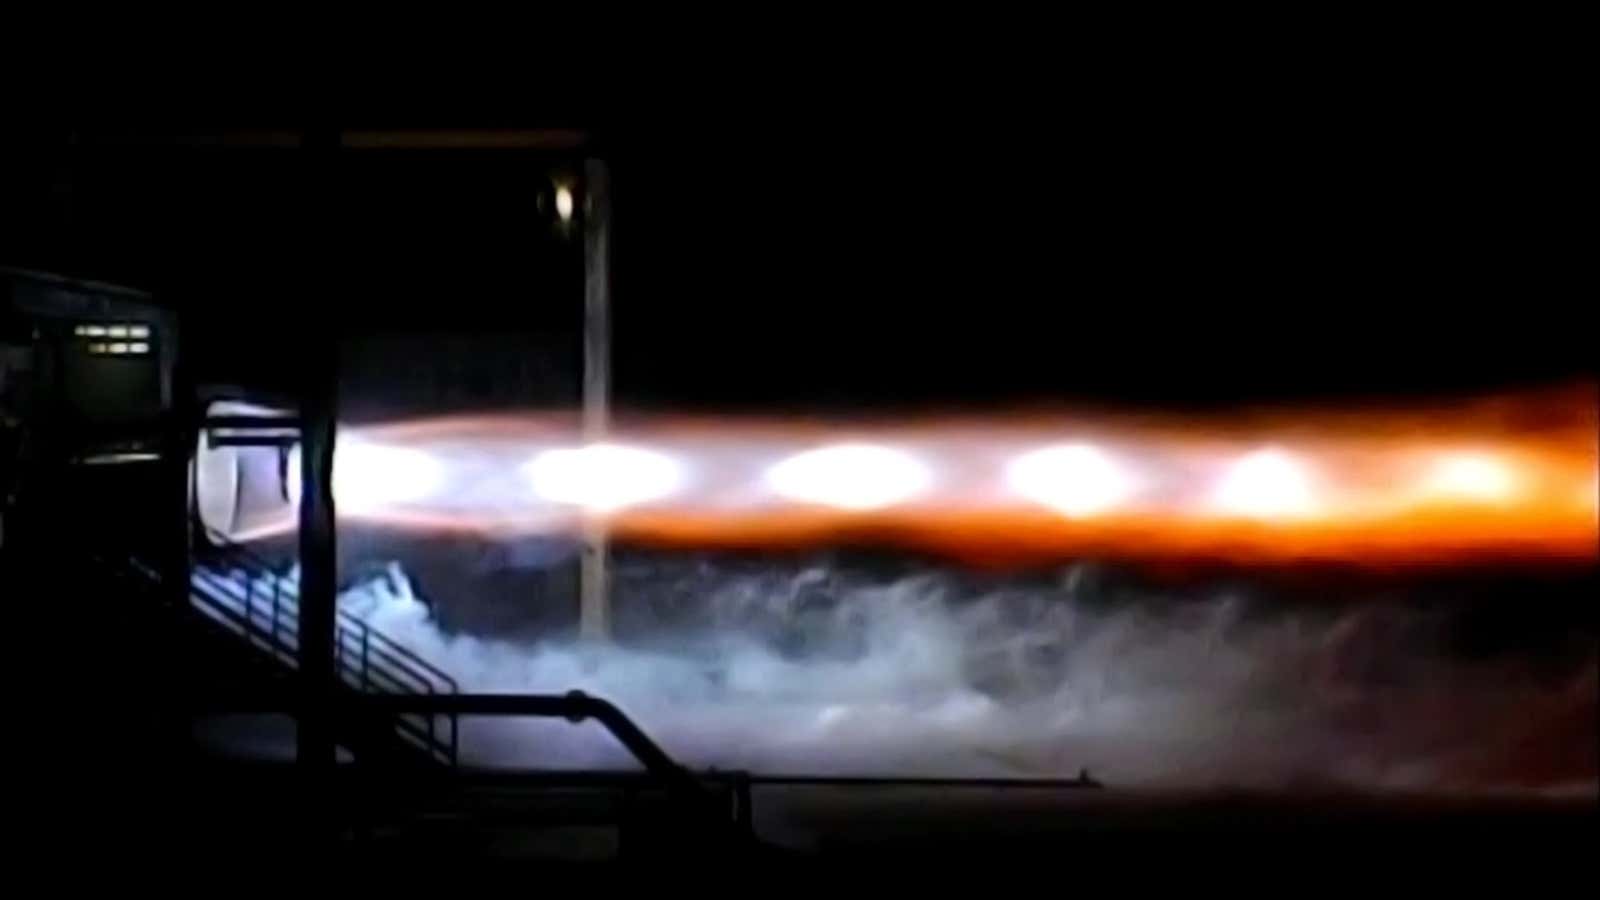 “Shock diamonds” form in the supersonic plume of the BE-4 engine.